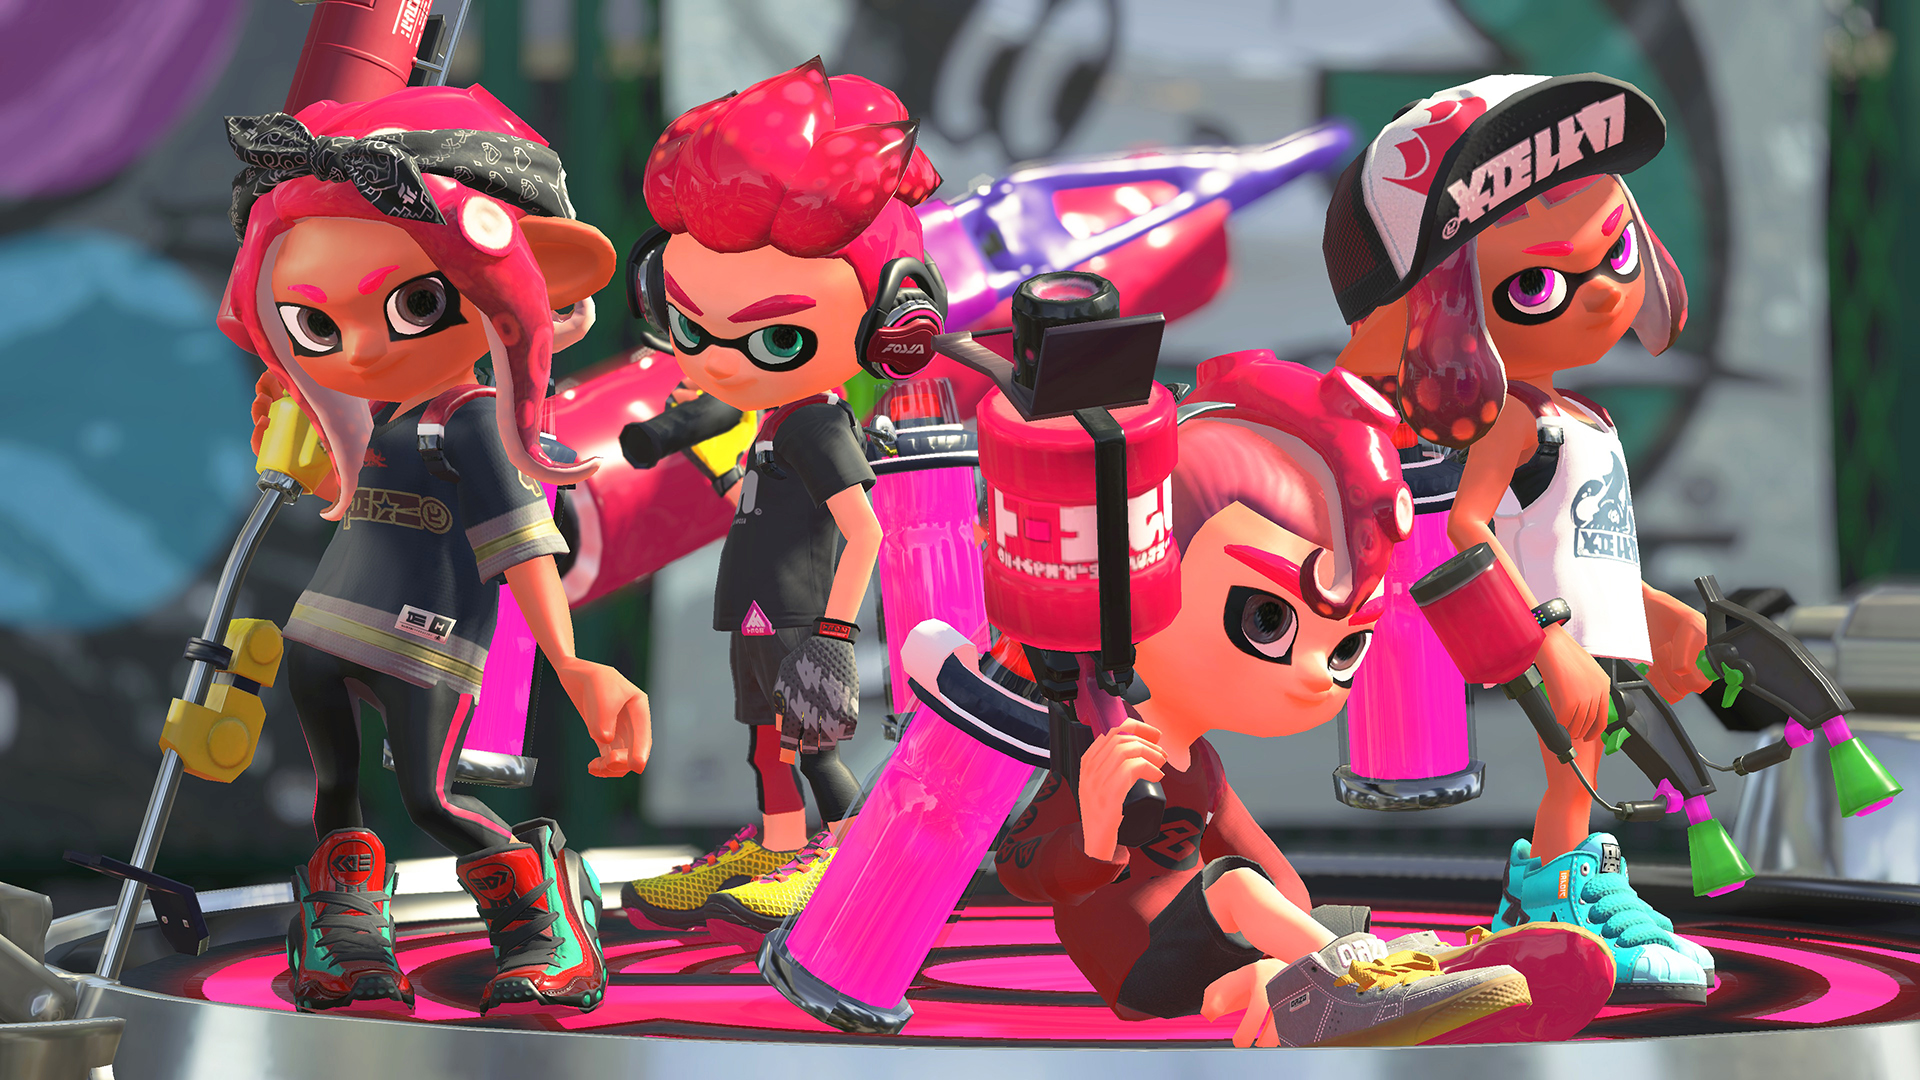 Octolings and Inklings on a battle spawnpoint.